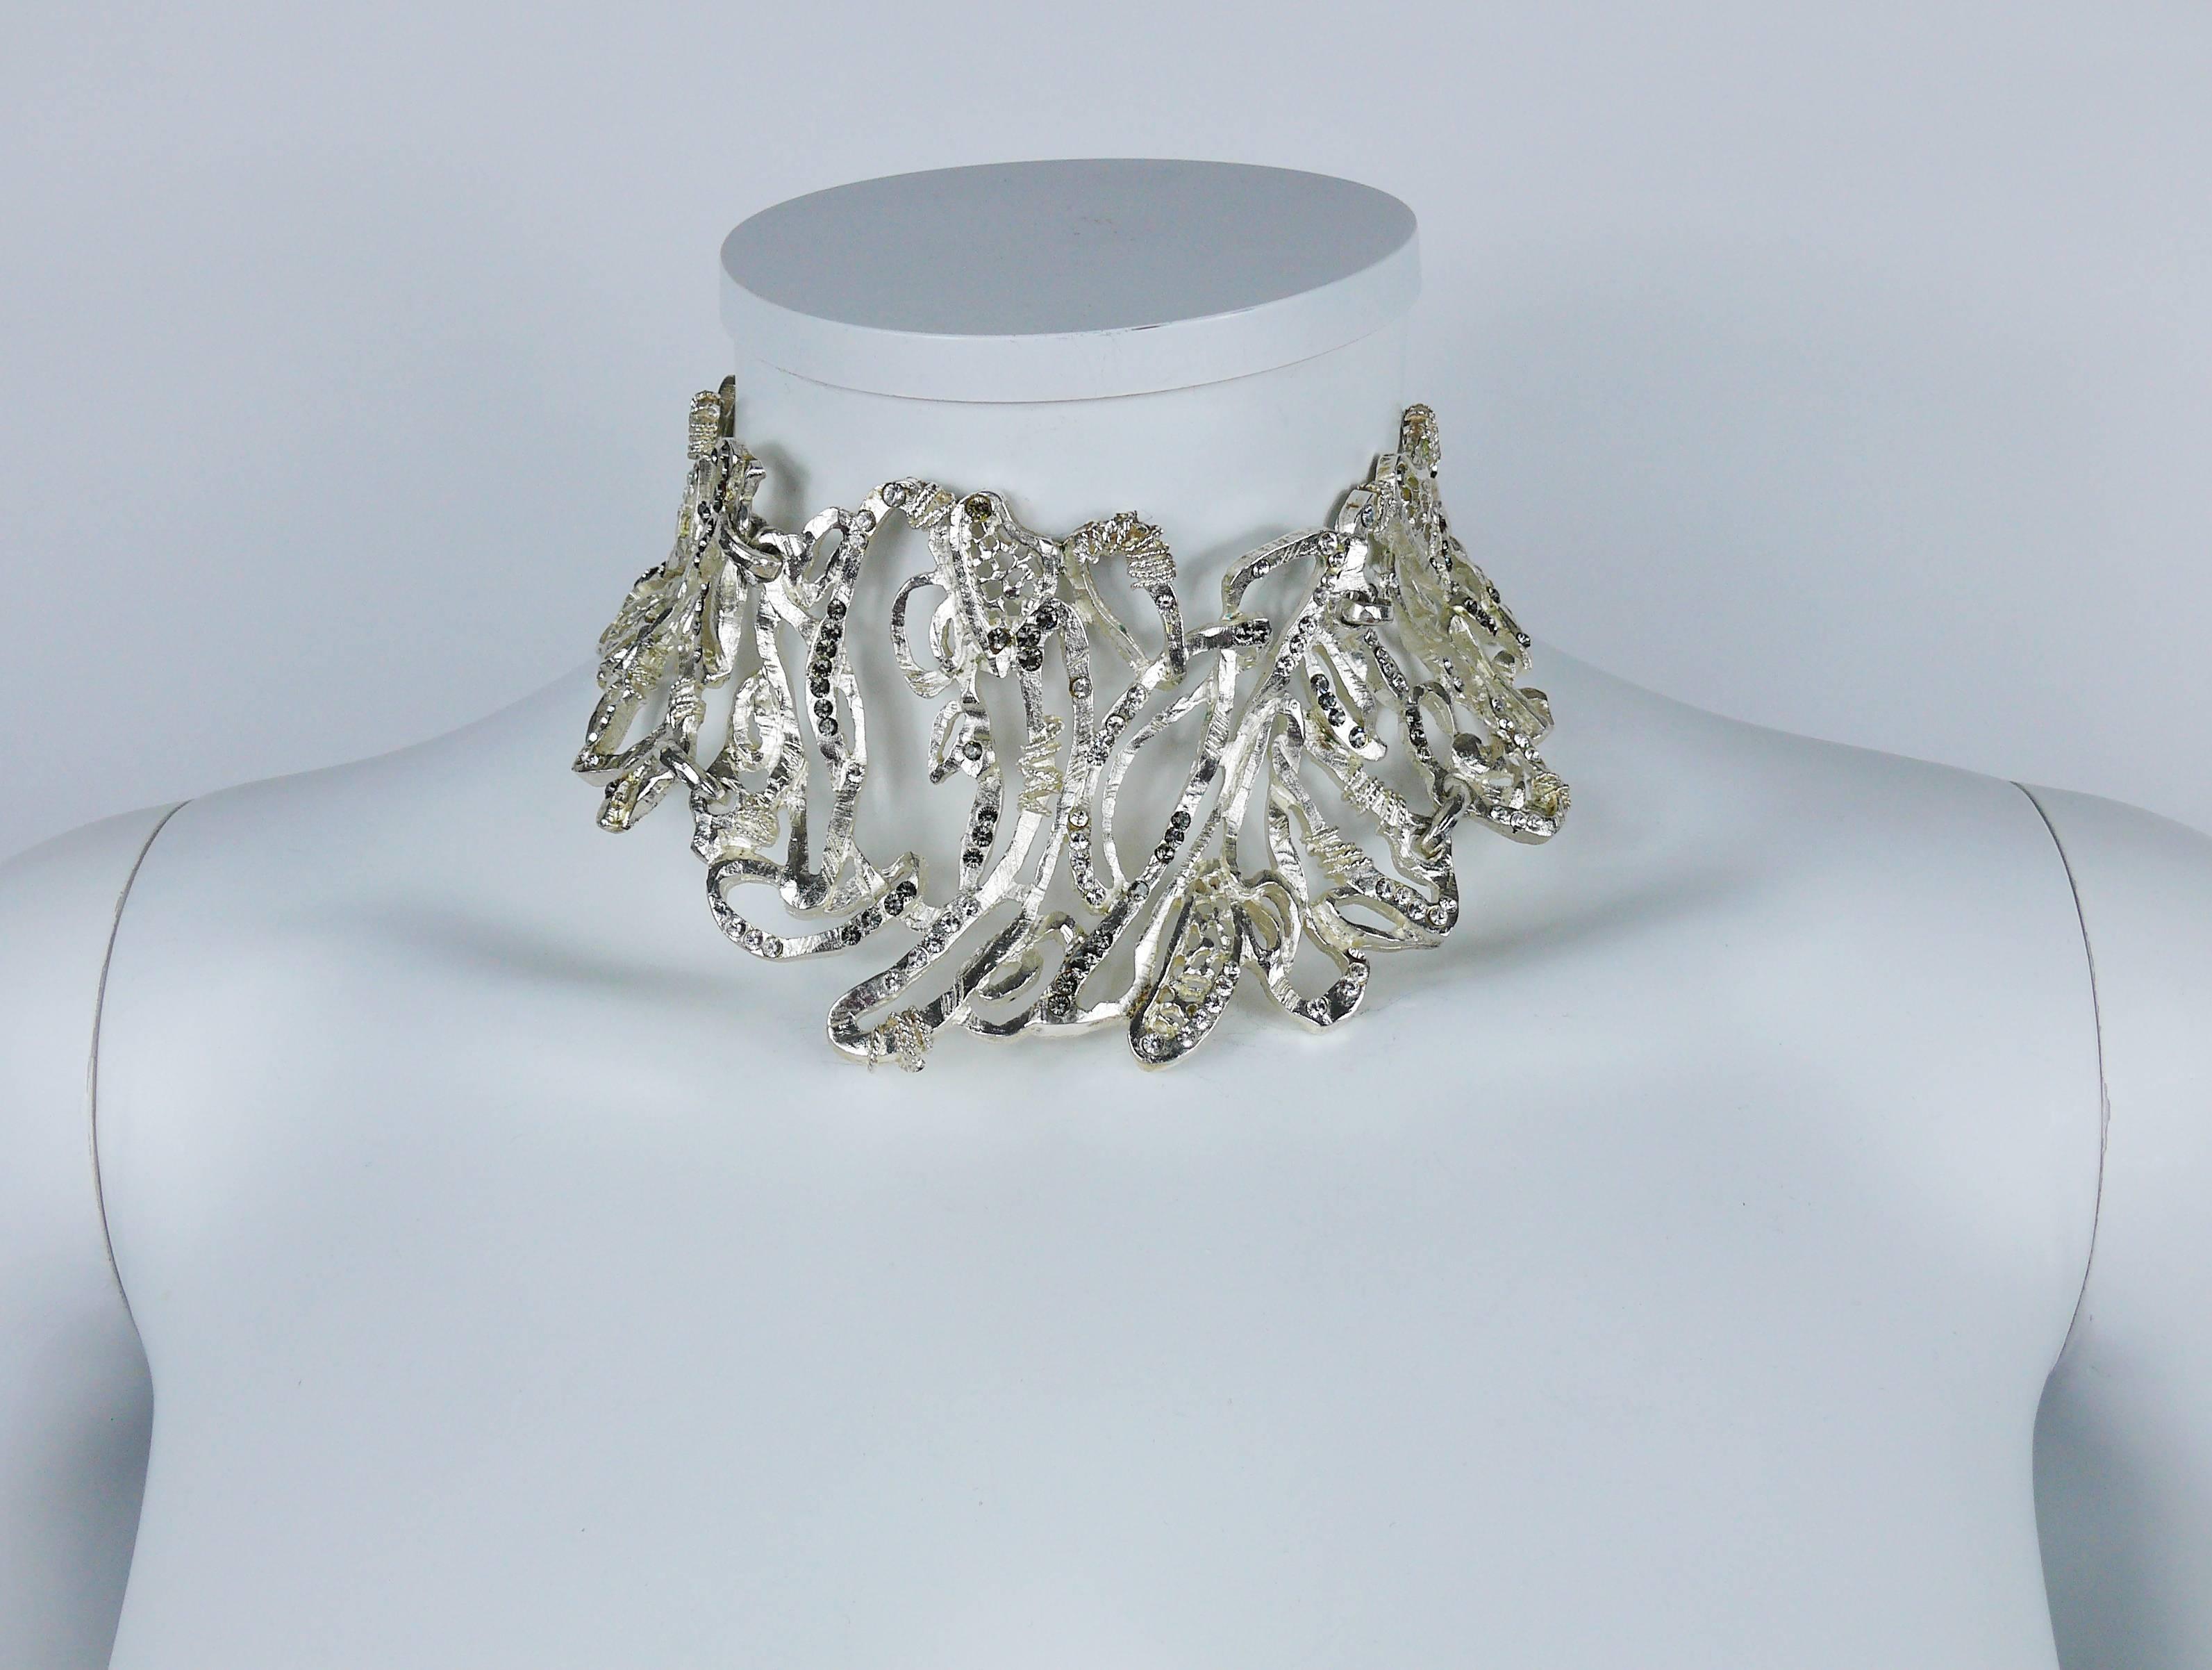 CHRISTIAN LACROIX vintage rare opulent silver toned choker necklace with crystal embellishement.

Silver tone metal hardware.

T-bar closure.
Extension chain.

Marked CHRISTIAN LACROIX CL Made in France.

NOTES
- This is a preloved vintage item,